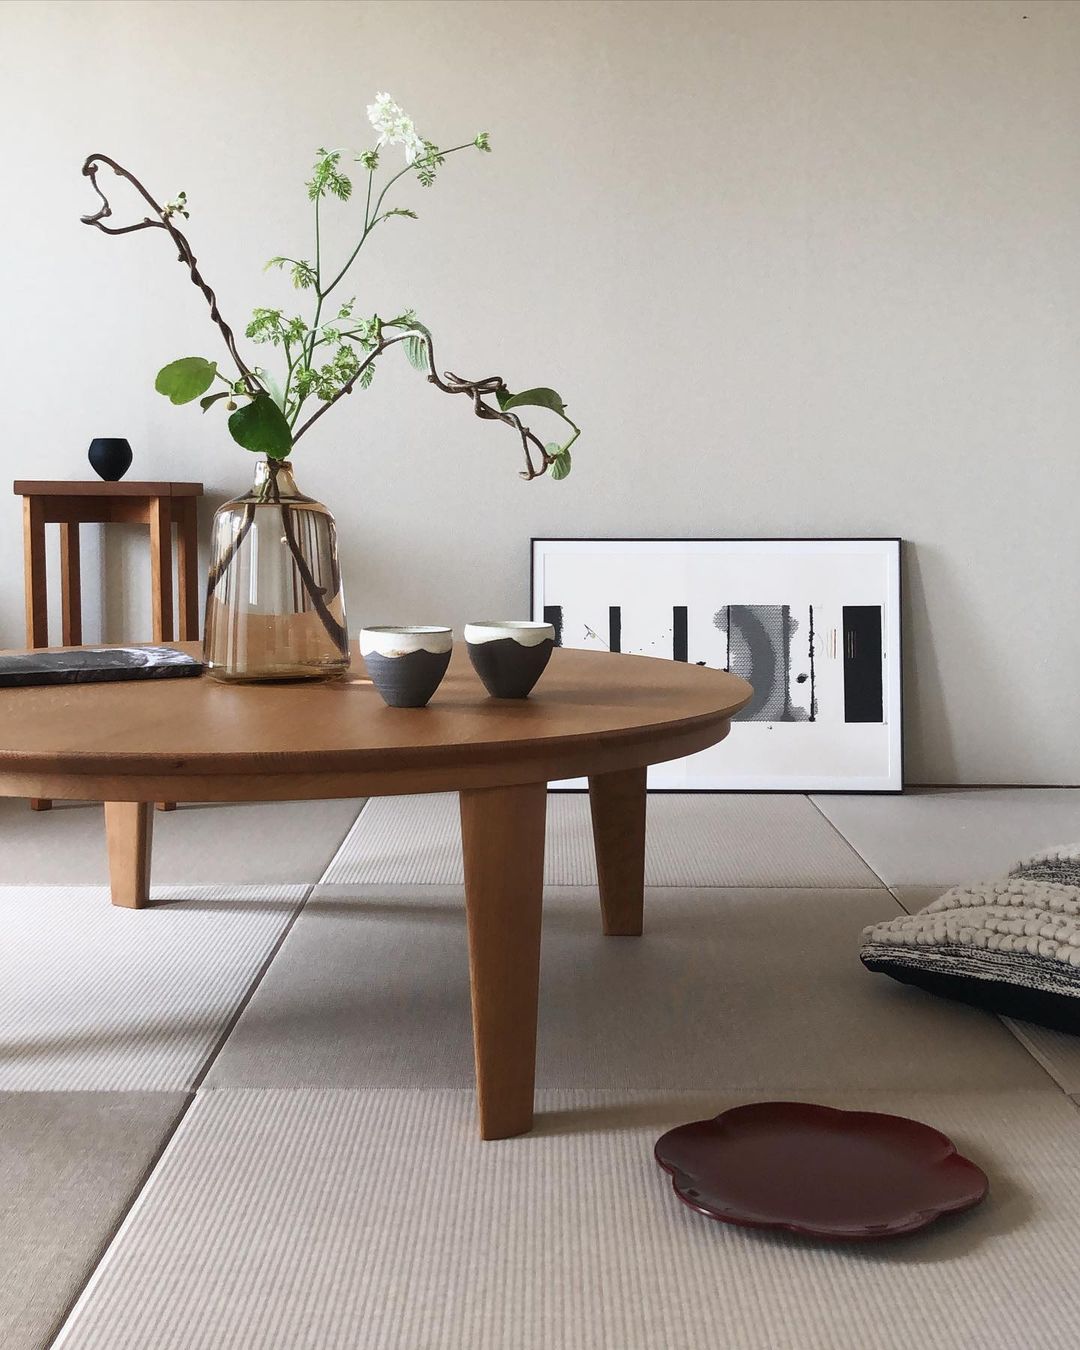 japanese home decor - low tables